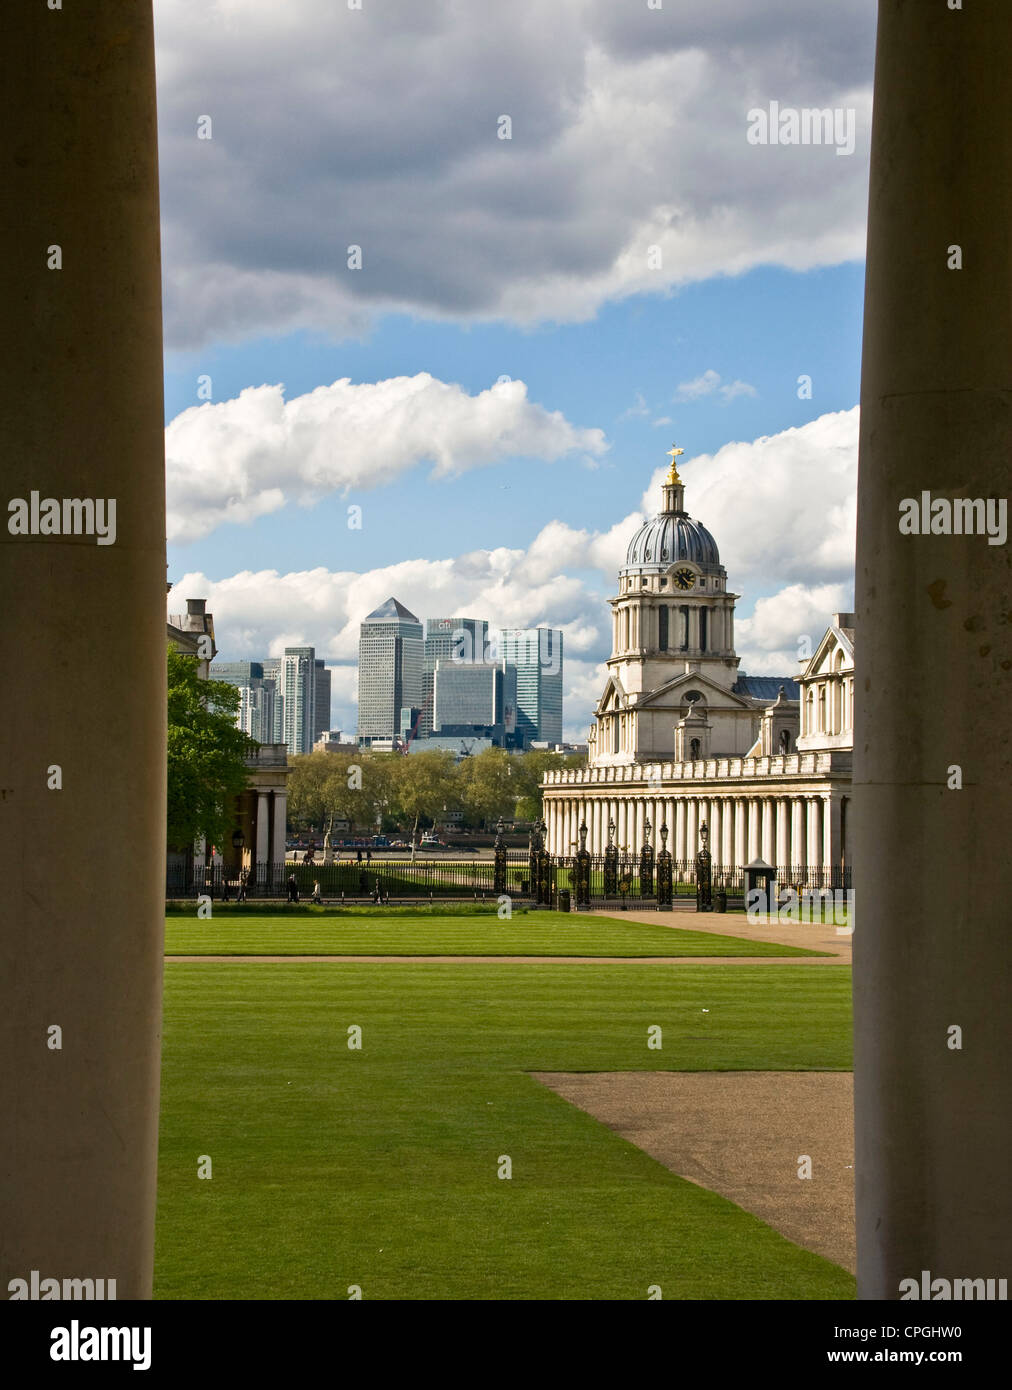 Old royal Naval College Greenwich a UNESCO world heritage site and Canary Wharf business district London England Europe Stock Photo